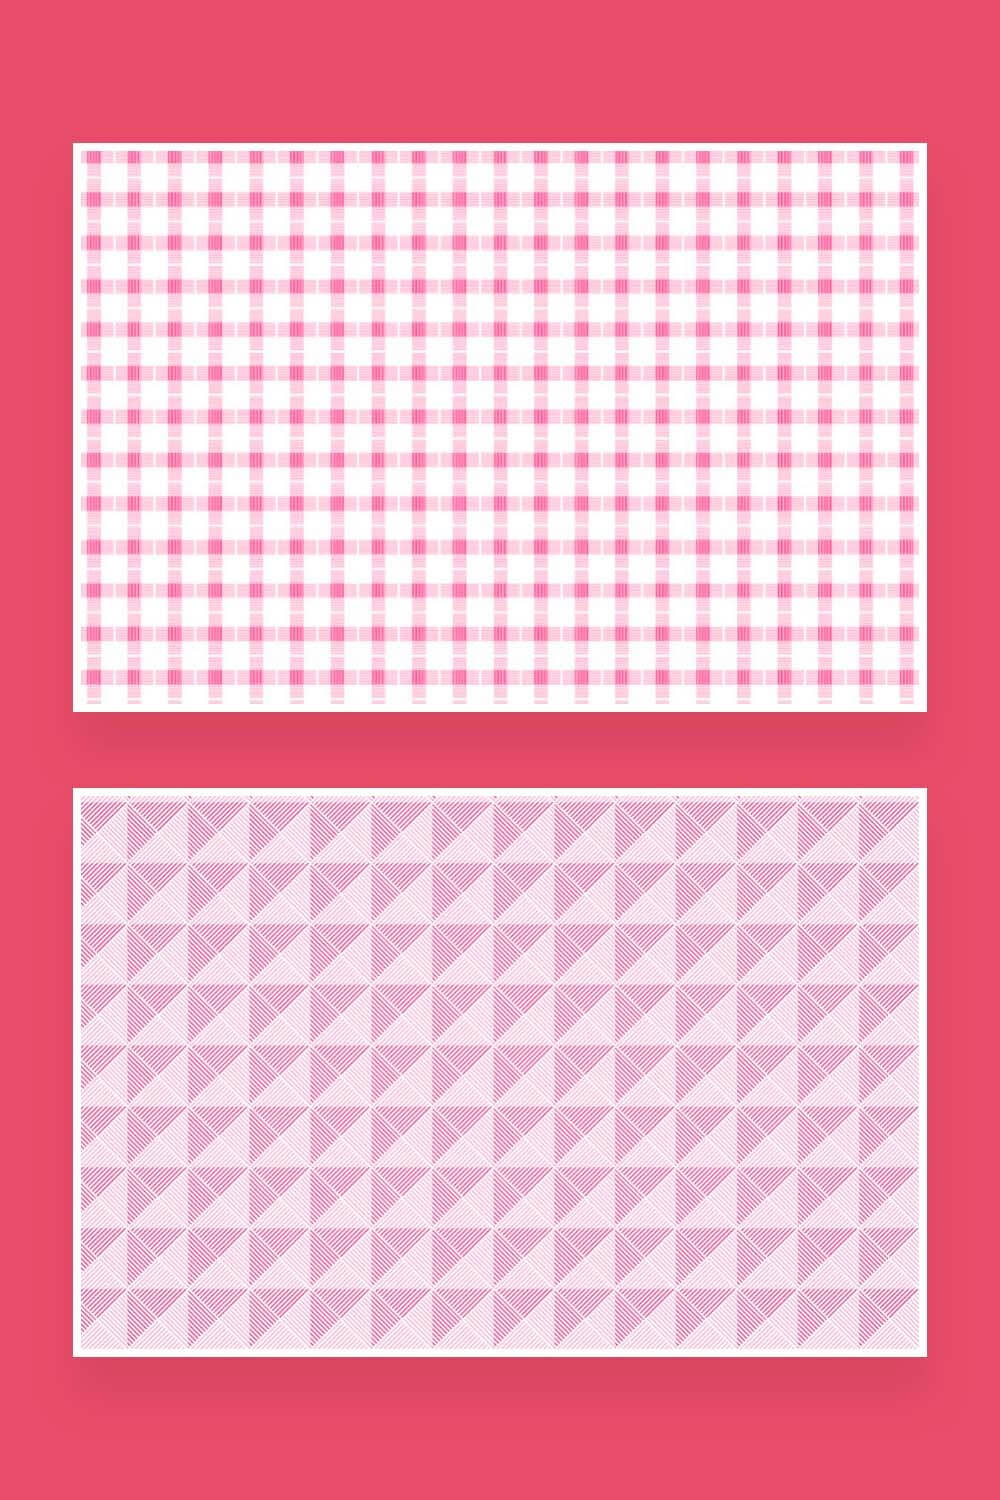 Two pictures of textile seamless patterns in pink shades.